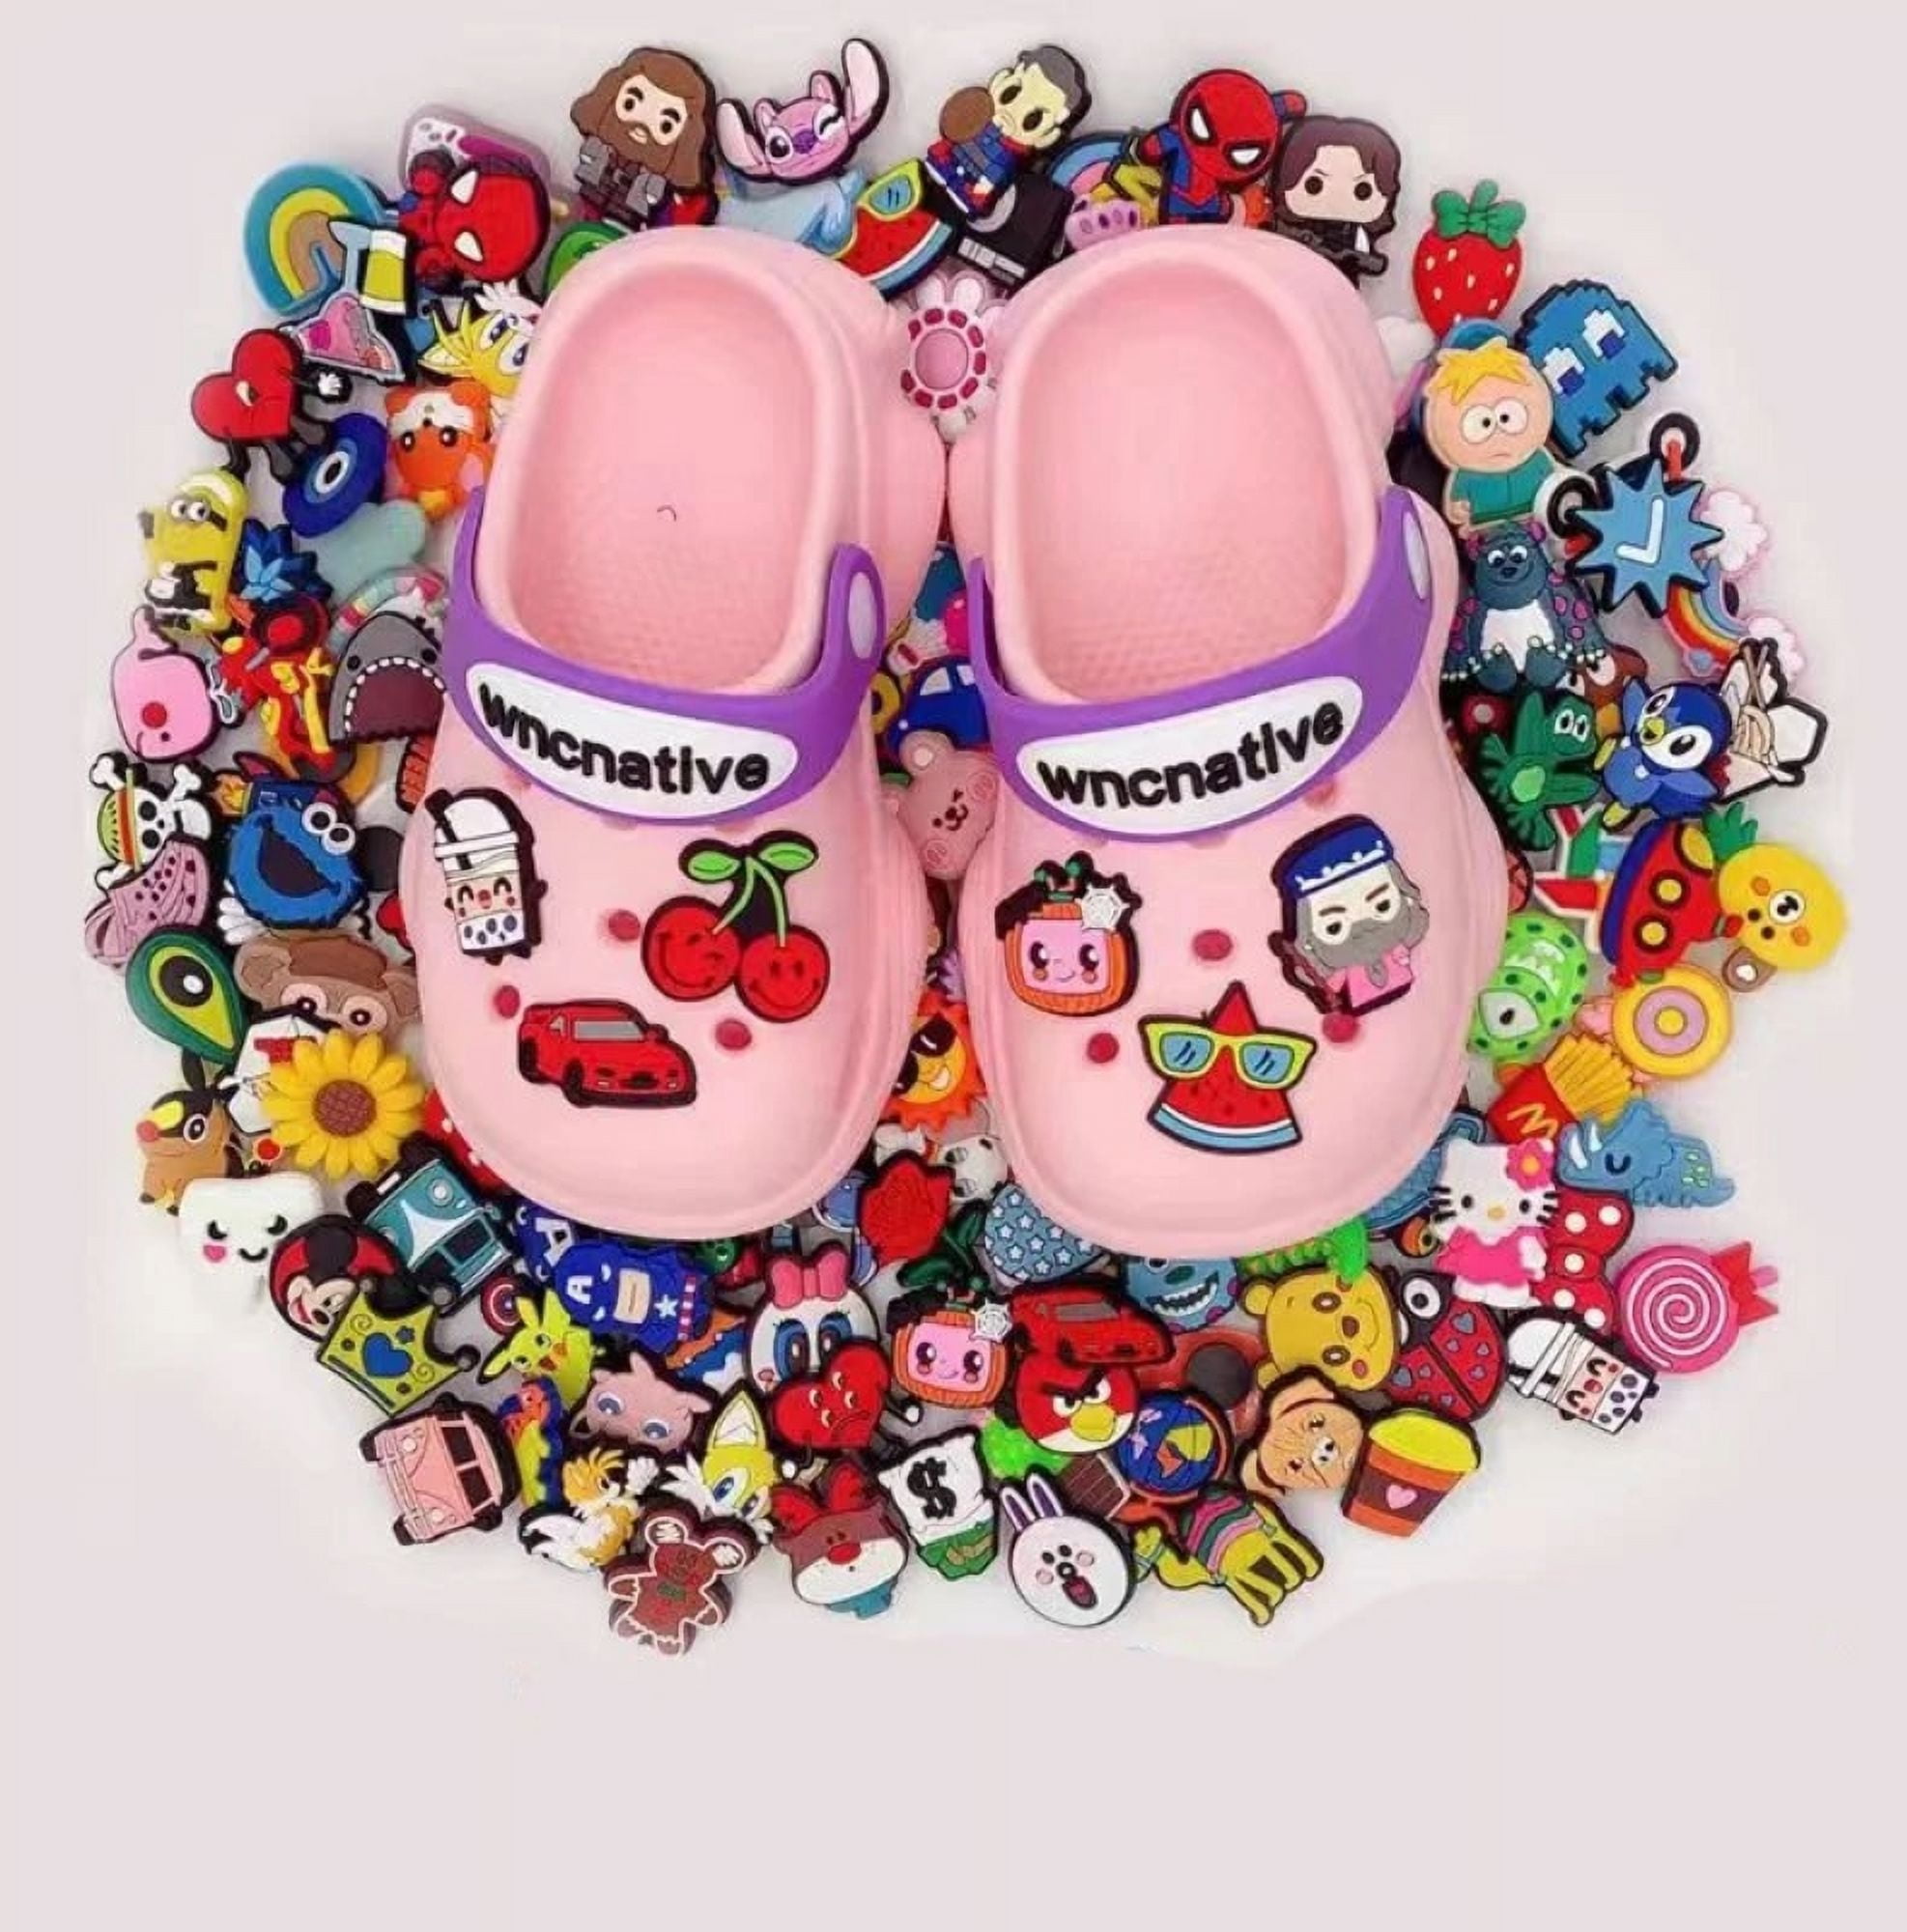 Wholesale Pvc Anime Jibbitz Shoe Decoration Charms Fit For Croc Charms From  Yanming1113, $0.14